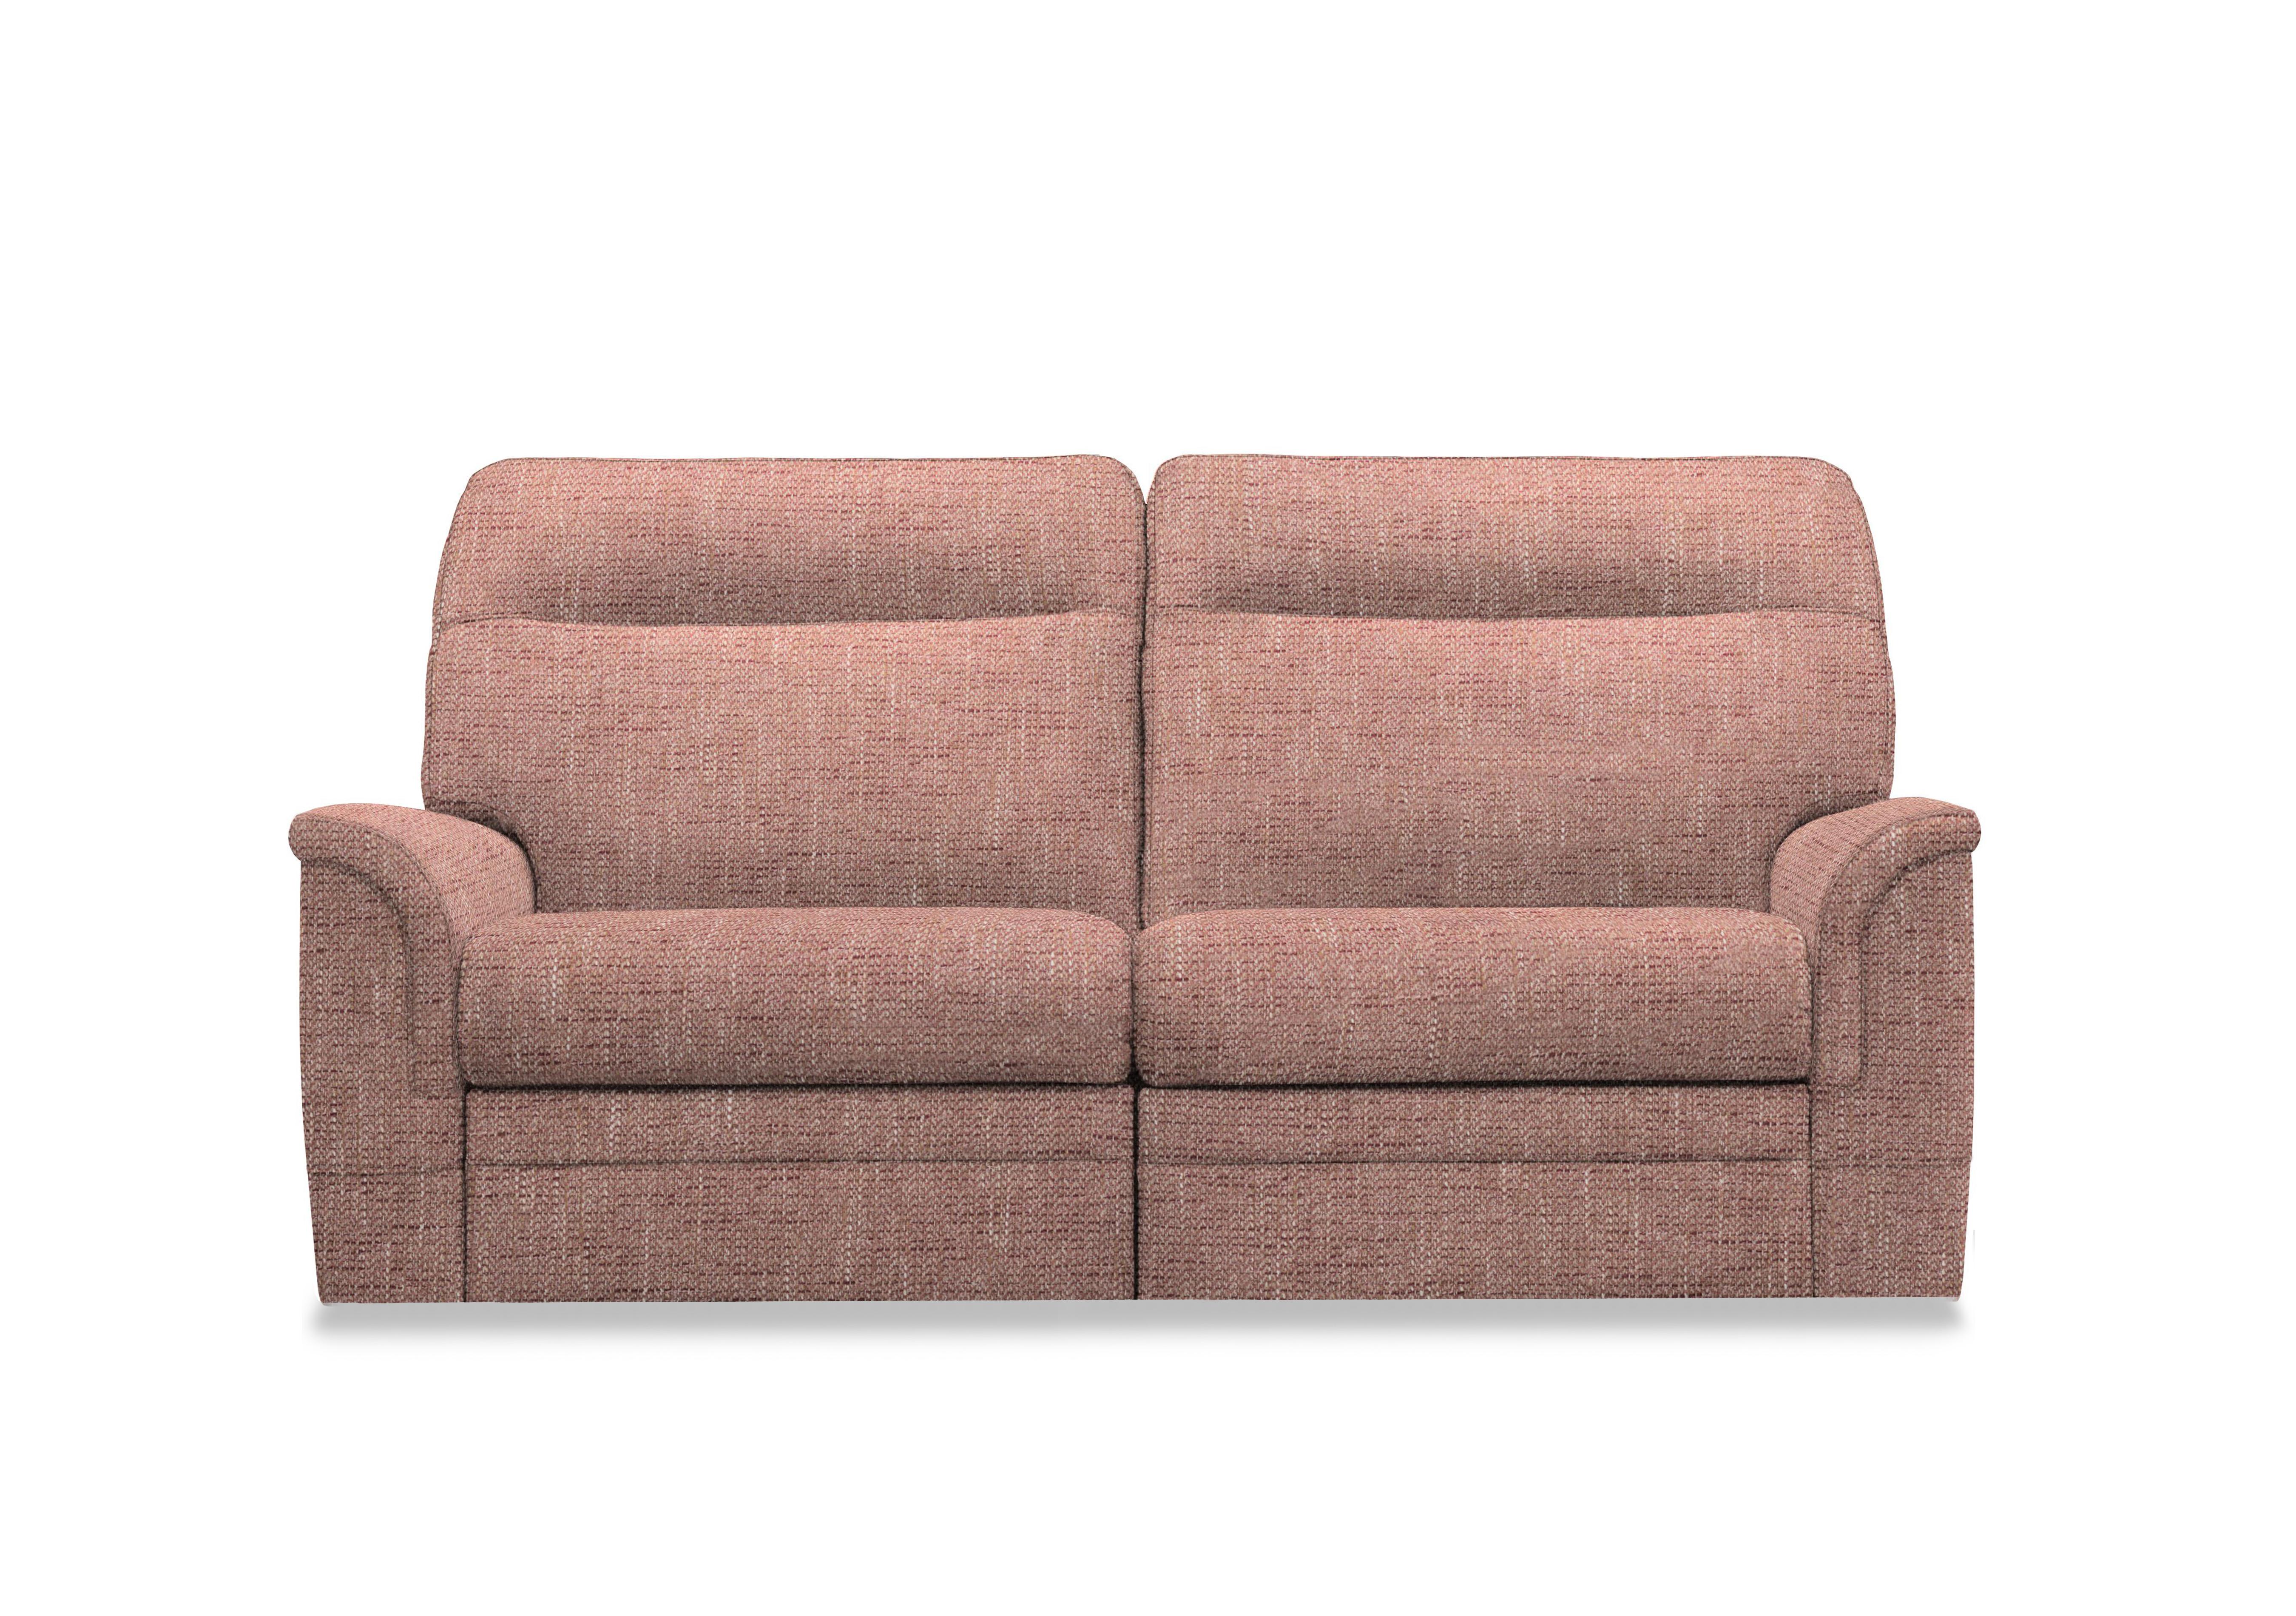 Hudson 23 Large 2 Seater Fabric Power Recliner Sofa with Power Headrests and Power Lumbar in Country Rose 001409-0003 on Furniture Village